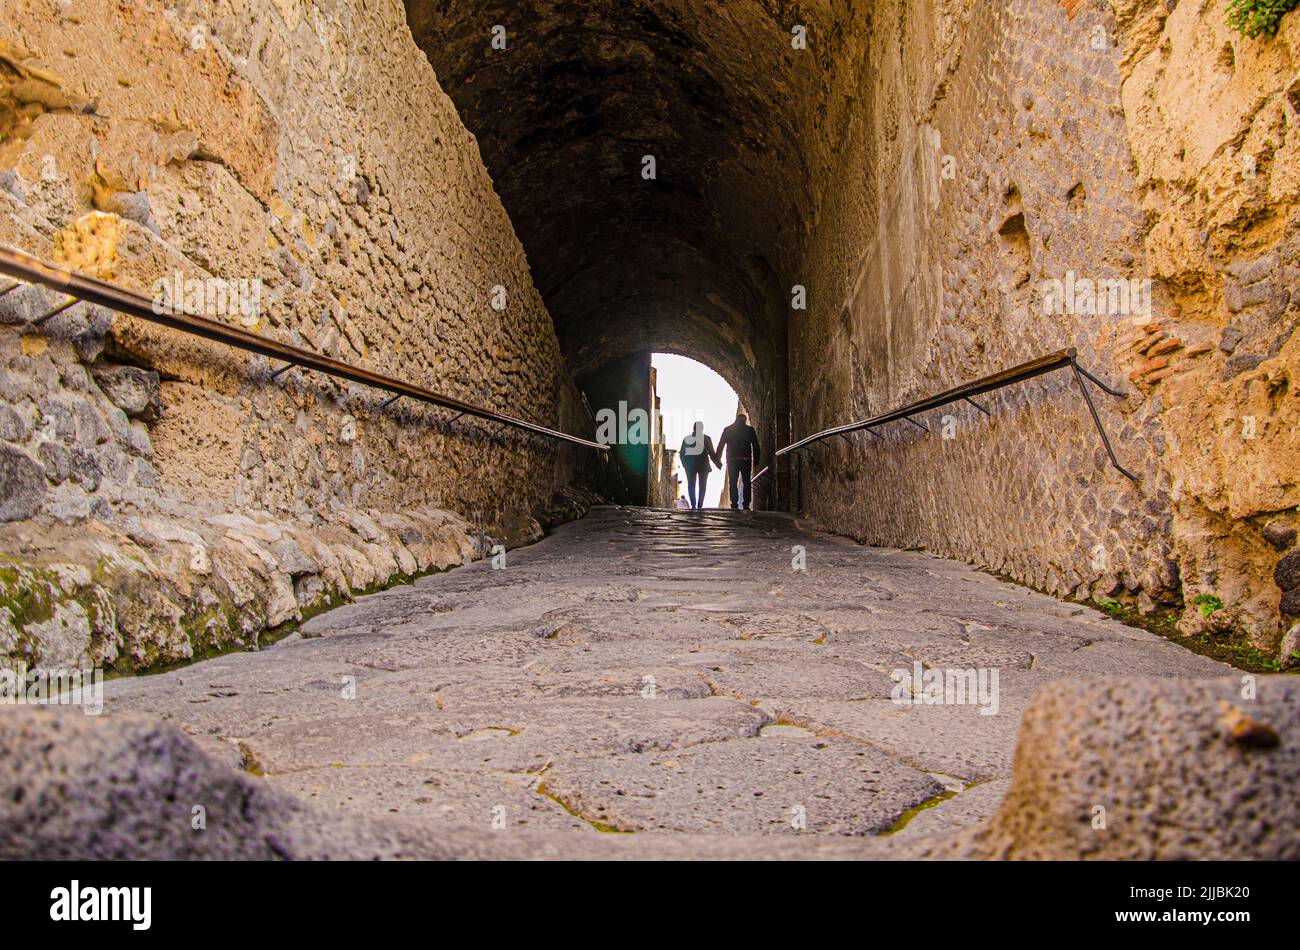 Sea gate. One of the entrances and possibly the main one at the time of splendor of the historic Roman city of Pompeii in the Gulf of Naples, about 24 Stock Photo